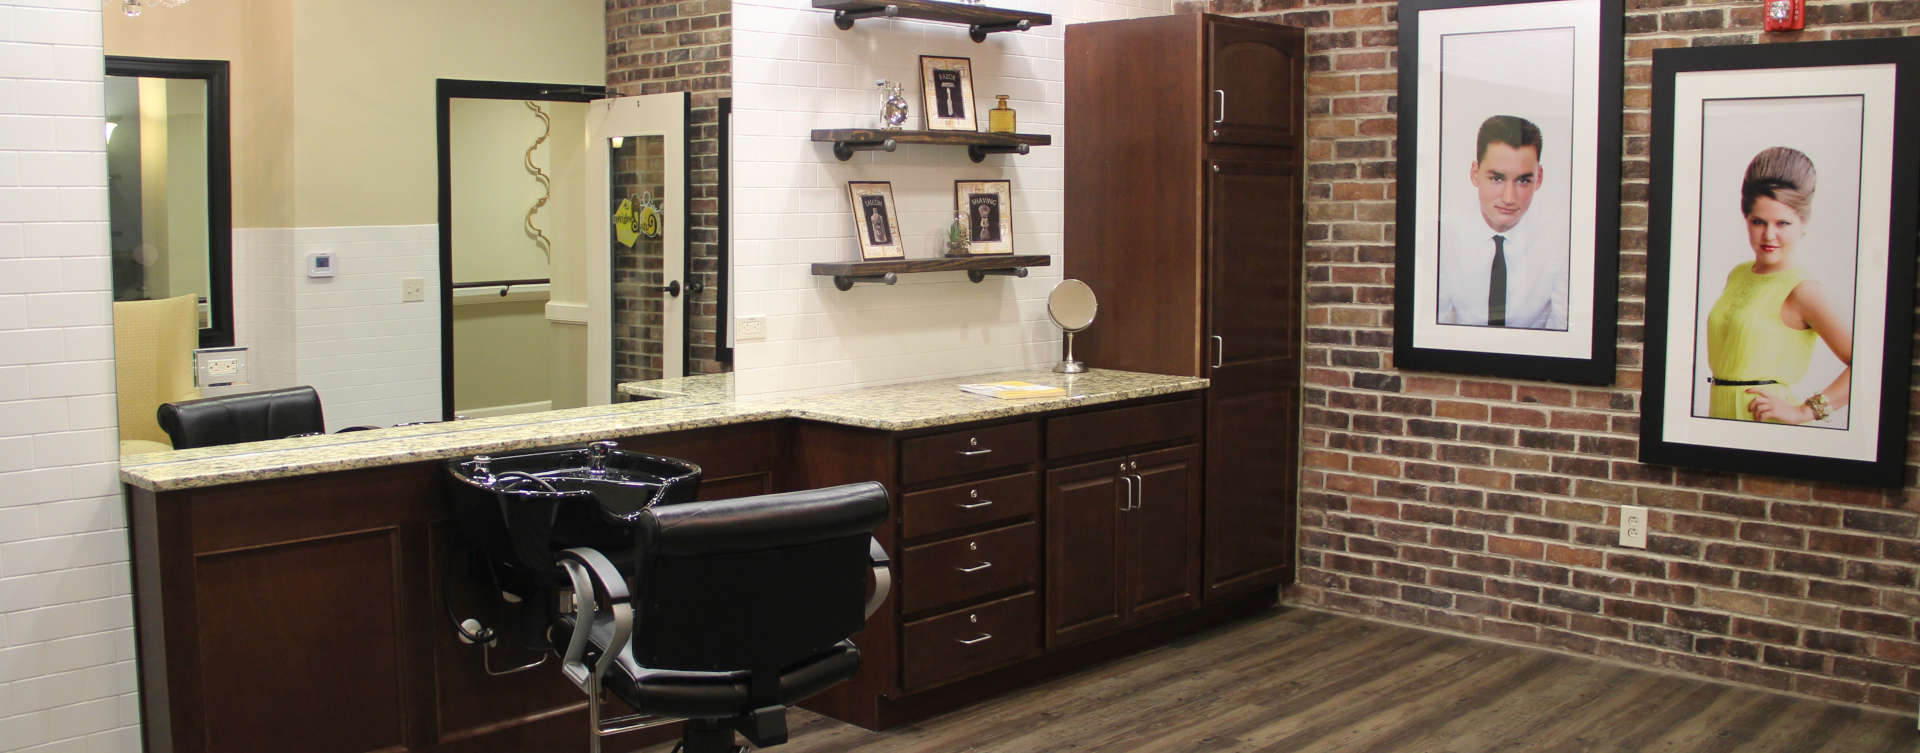 Strut on in and find out what the buzz is all about in the salon at Bickford of Tinley Park